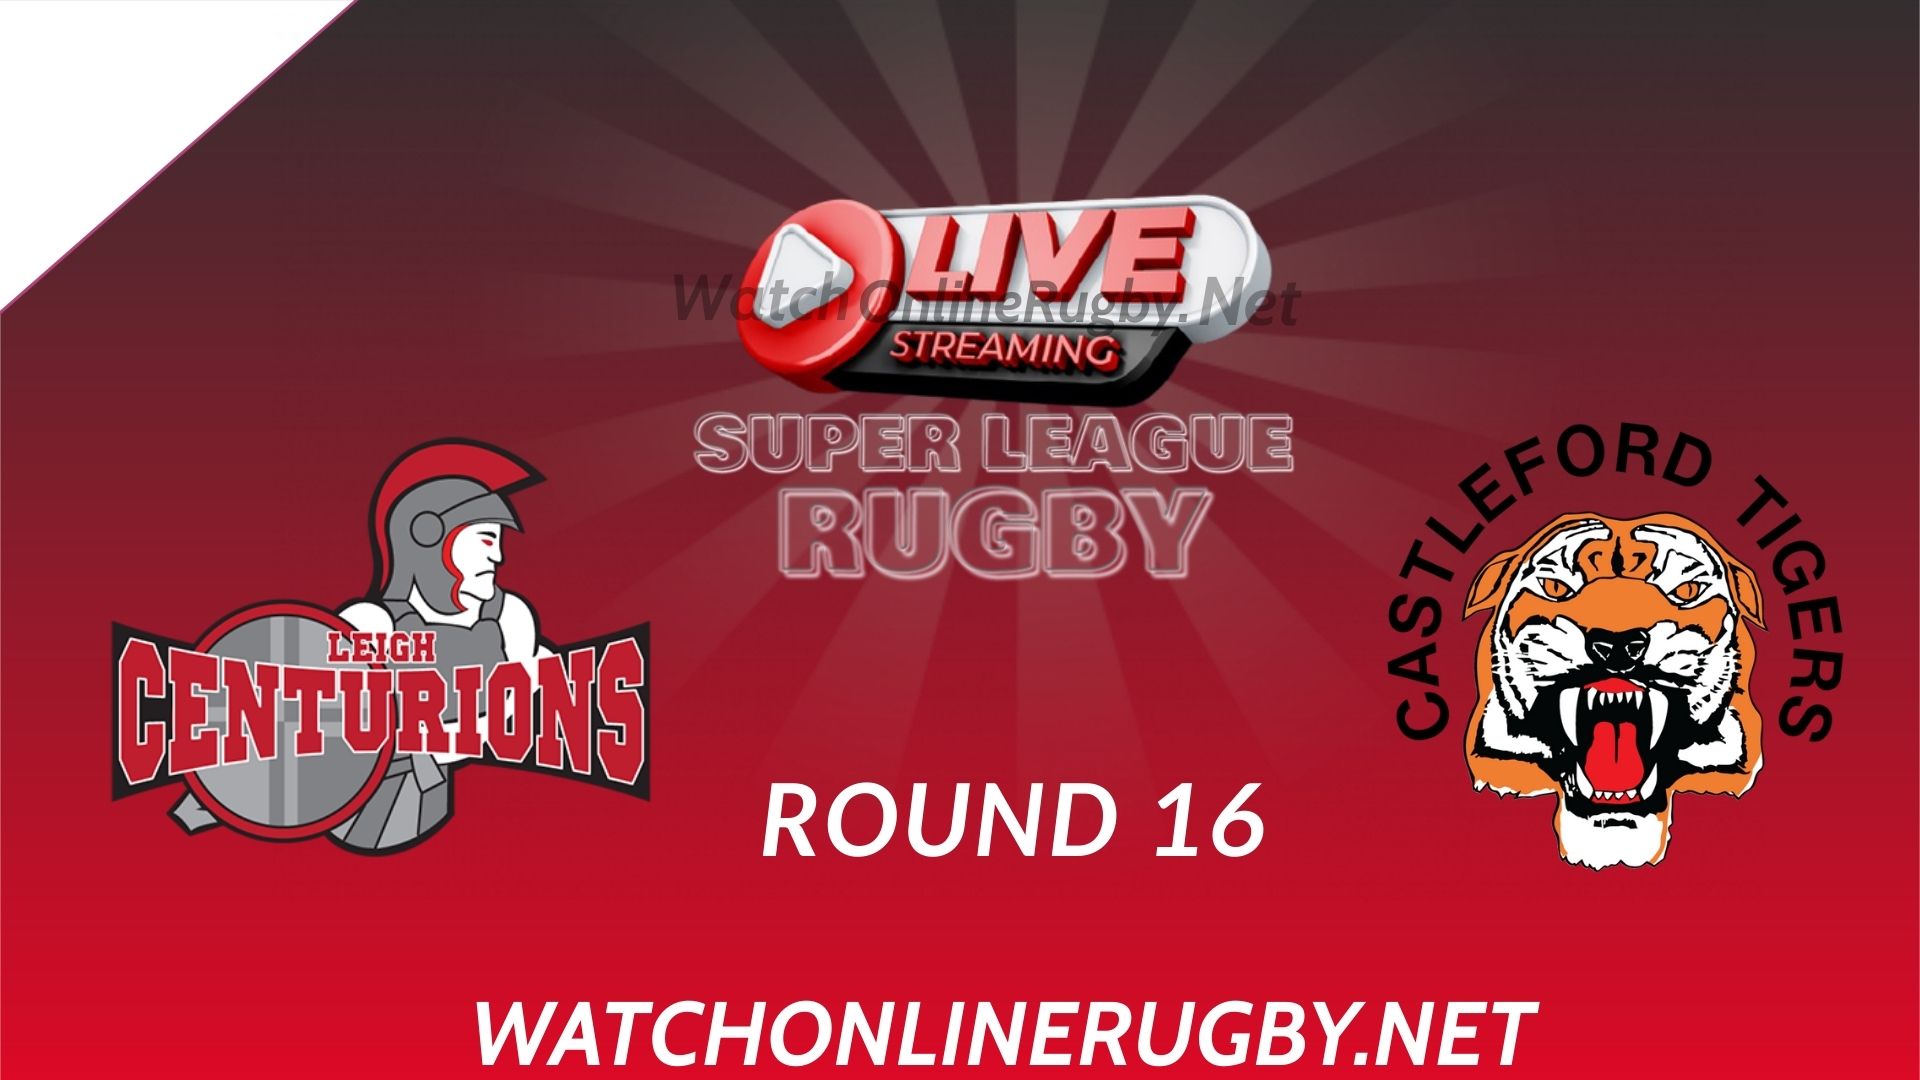 Leigh Centurions Vs Castleford Tigers Rugby HD Live